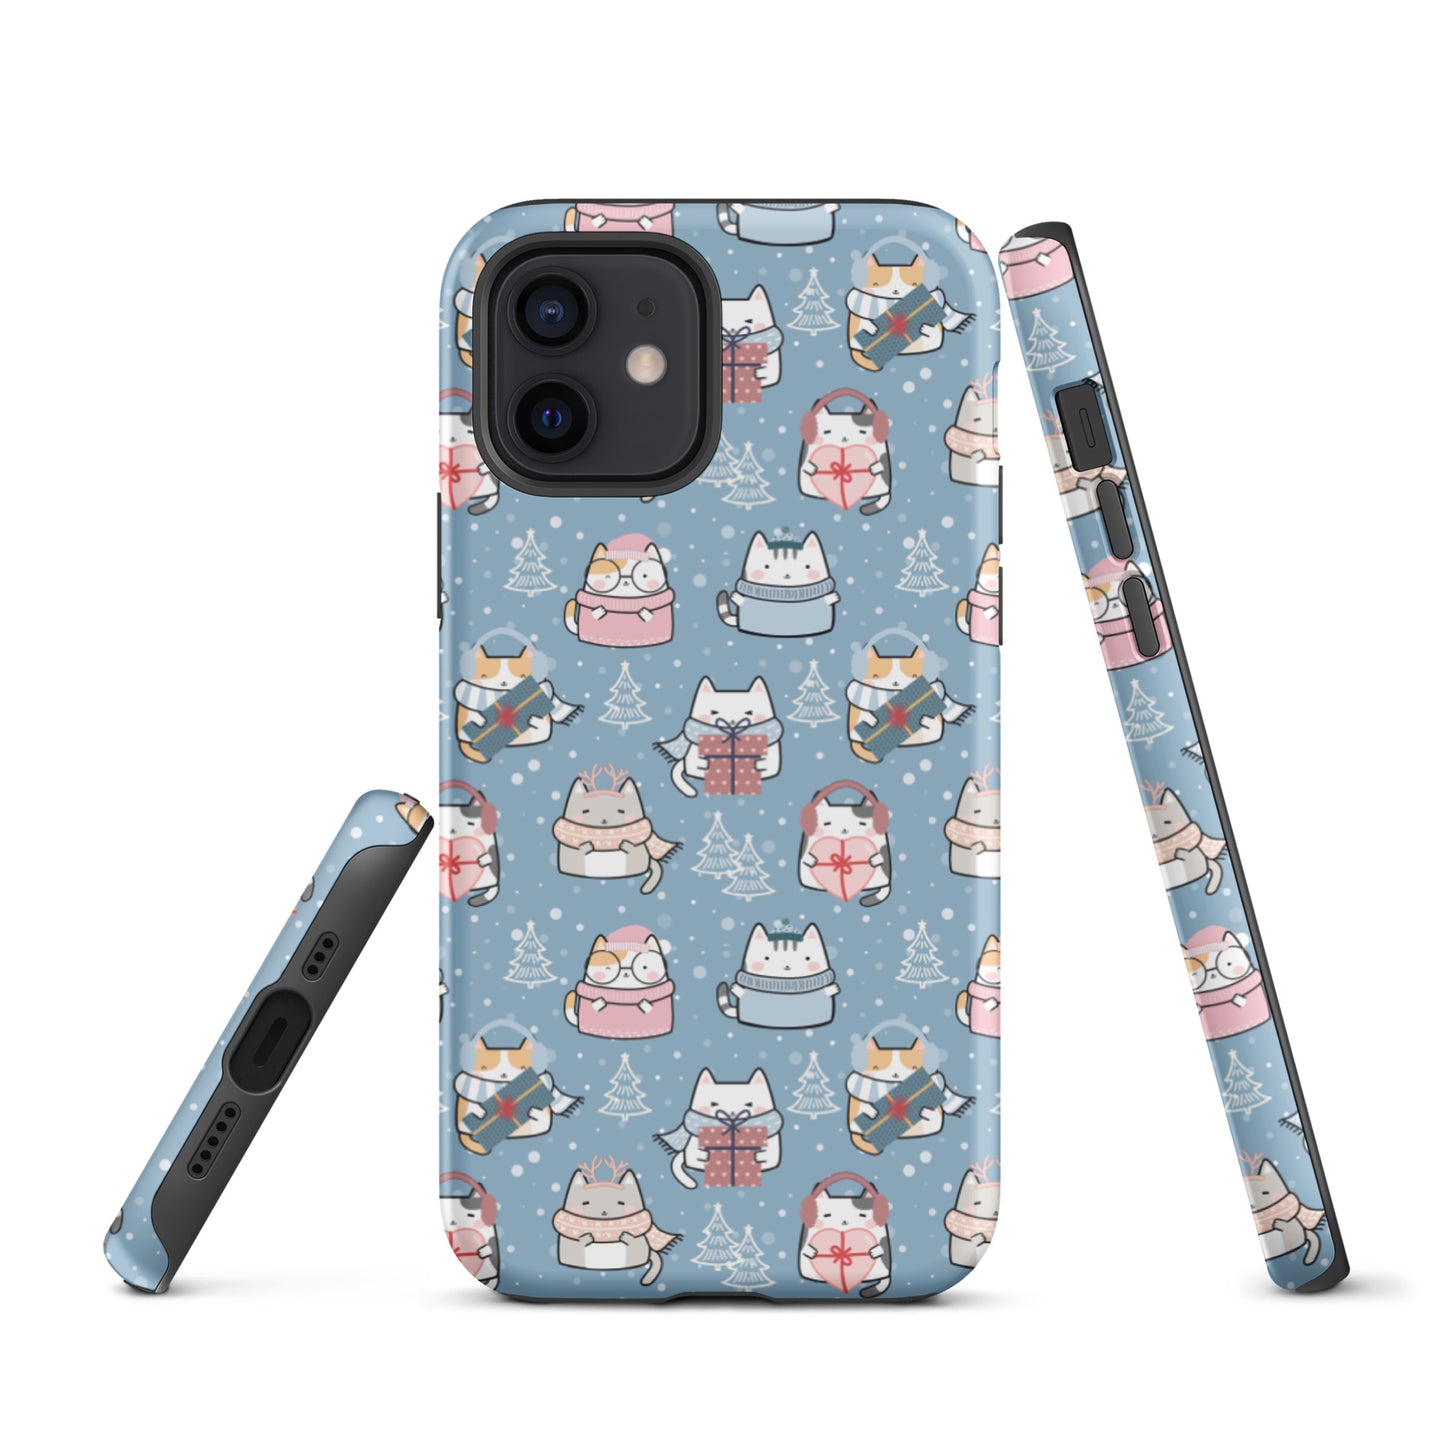 Tough case for iPhone 11, 12, 13, 14, 15 Variations | Cat Winter Blue Background